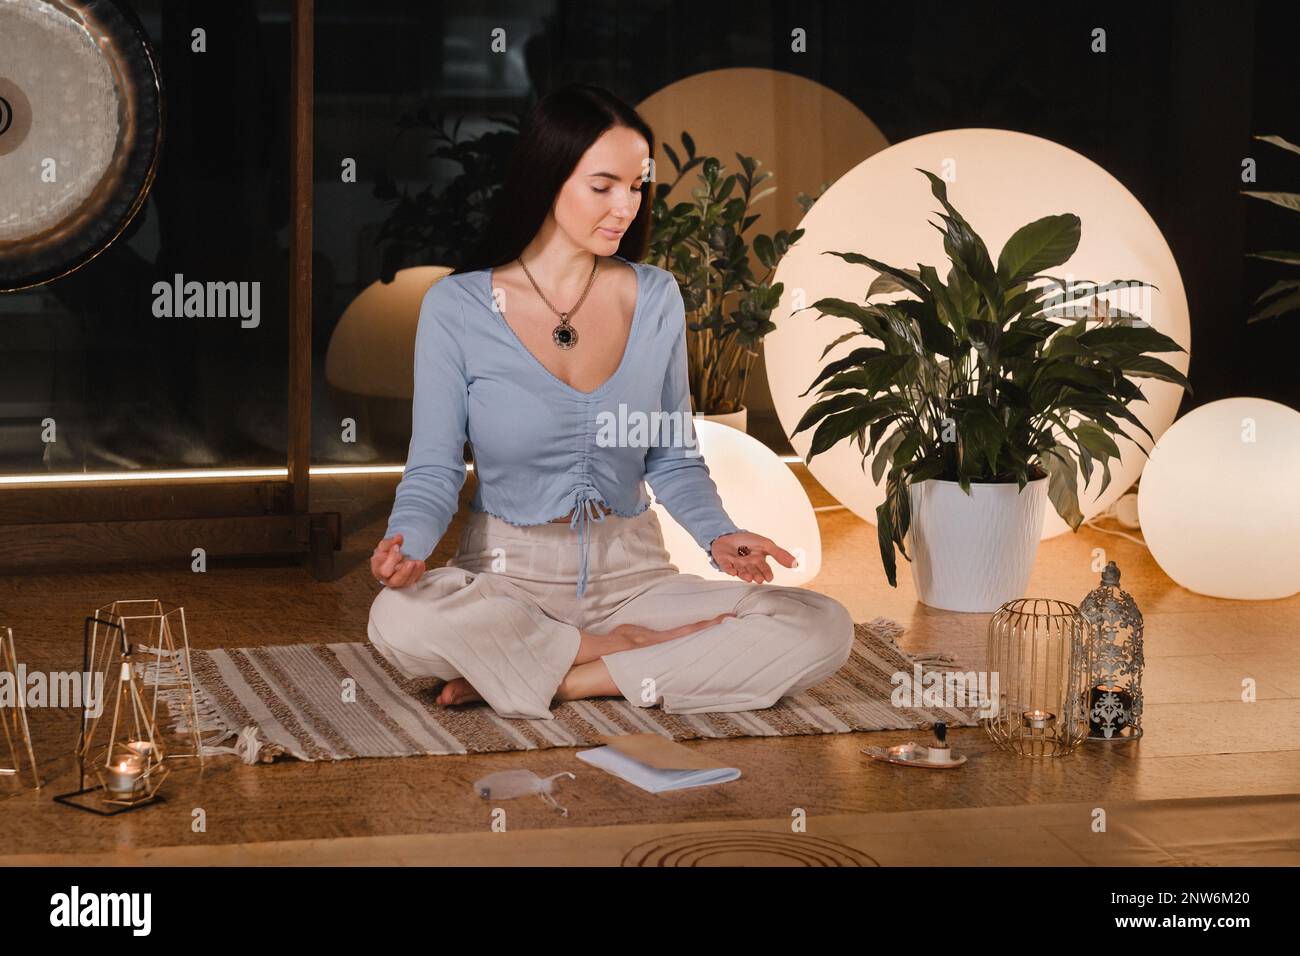 A young woman sitting in the Lotus position before the Game was playing and holding game cubes in her hand. Stock Photo